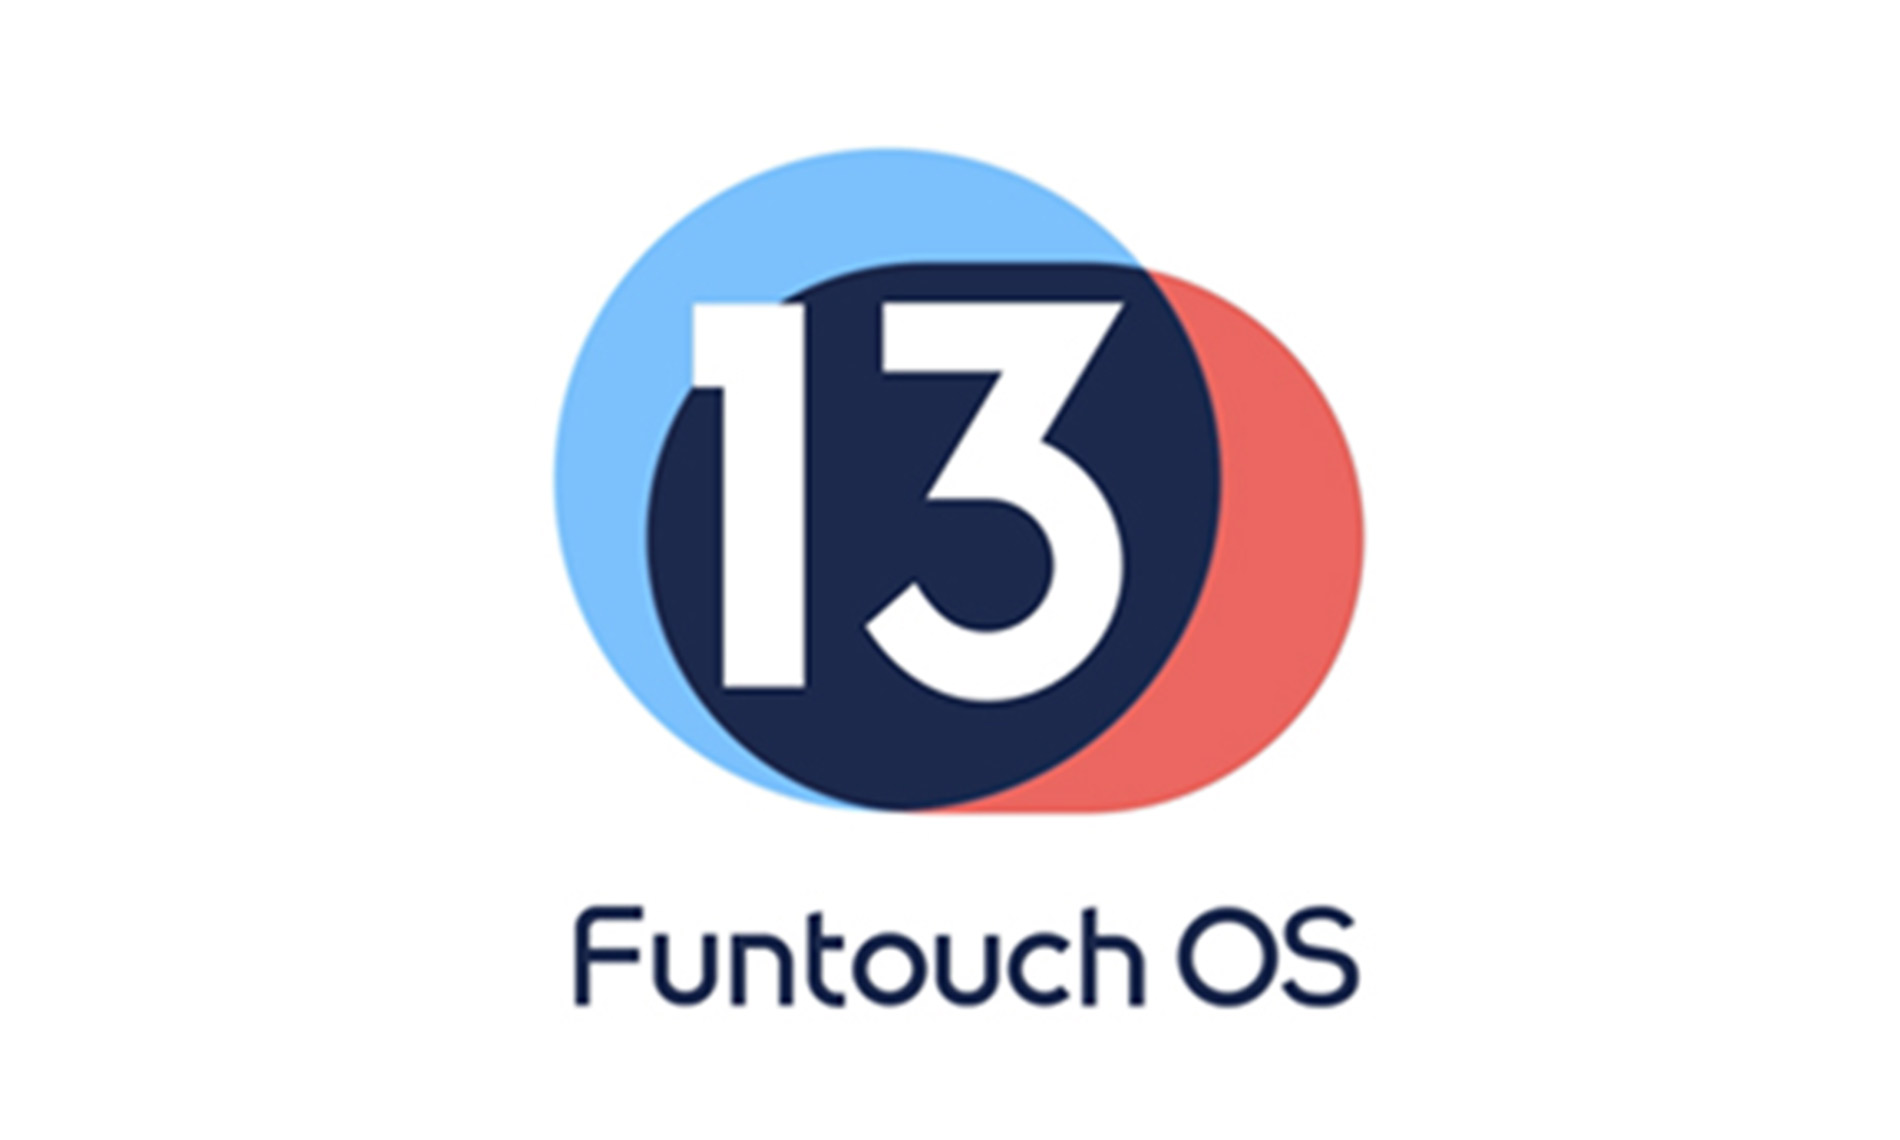 vivo's Funtouch OS 13 Now Available in Pakistan — Showcasing Advancements for A Smarter Lifestyle